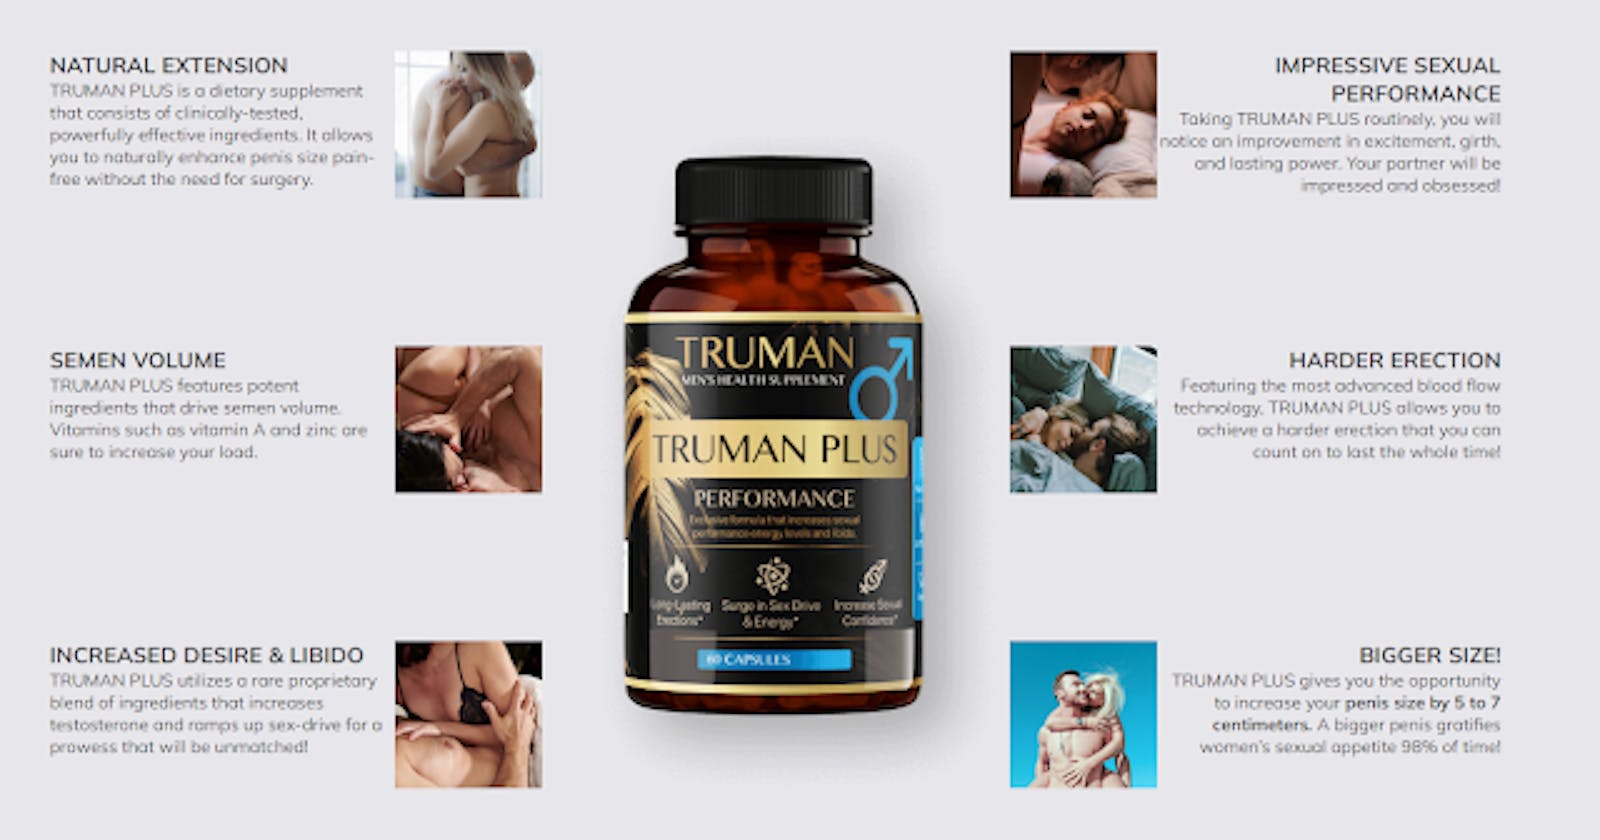 Truman Plus Male Enhancement 100% Natural And Safe, Does It Really Work Or Not?